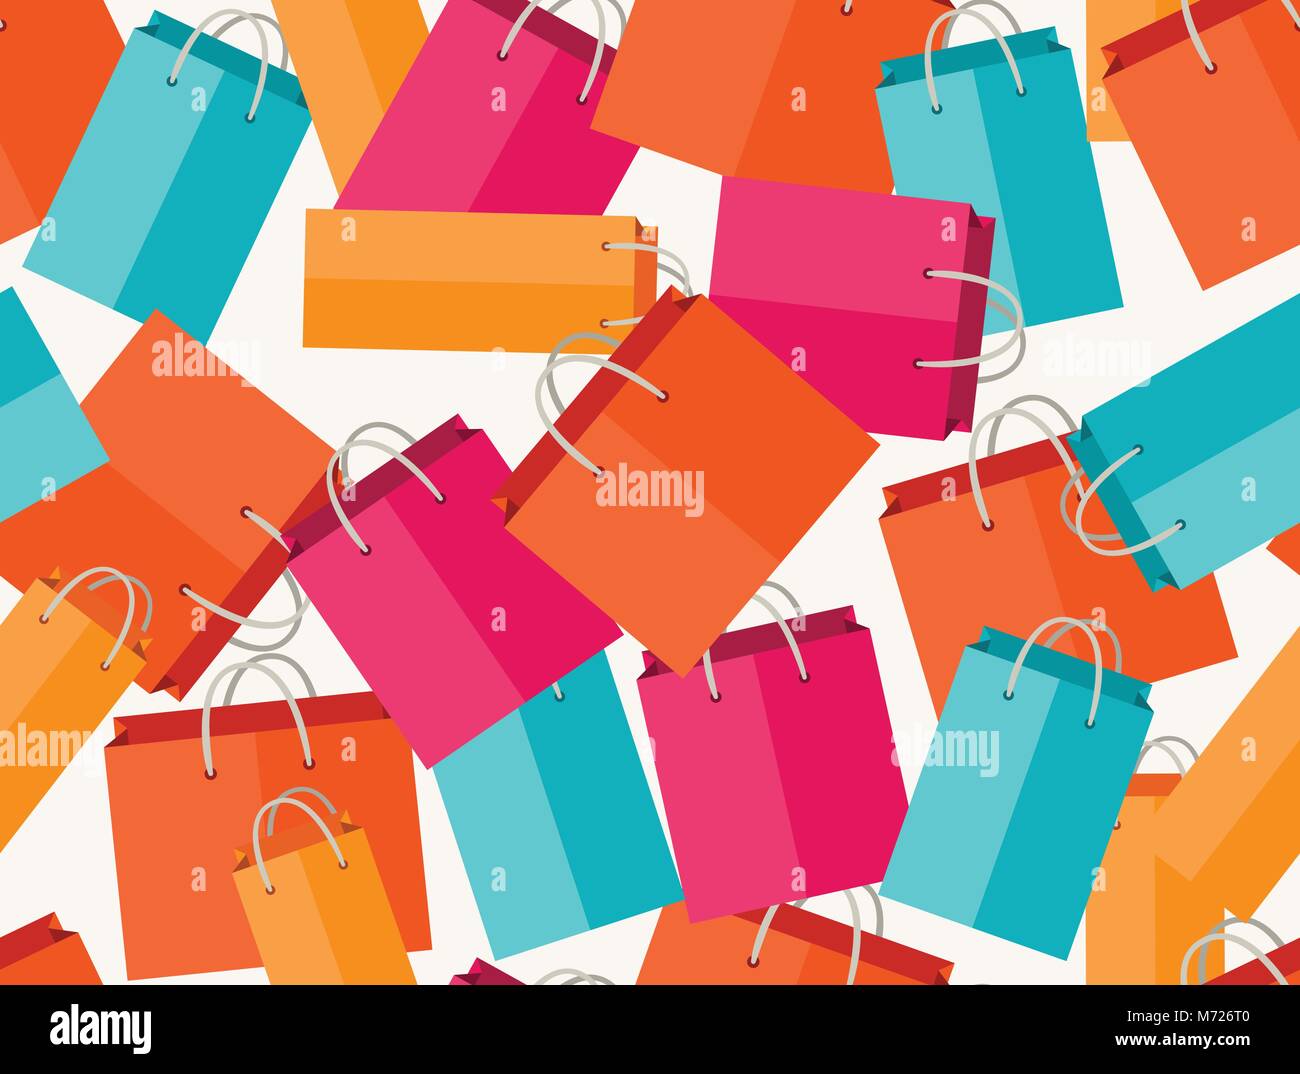 Sale seamless pattern with shopping bags in flat design style Stock Vector